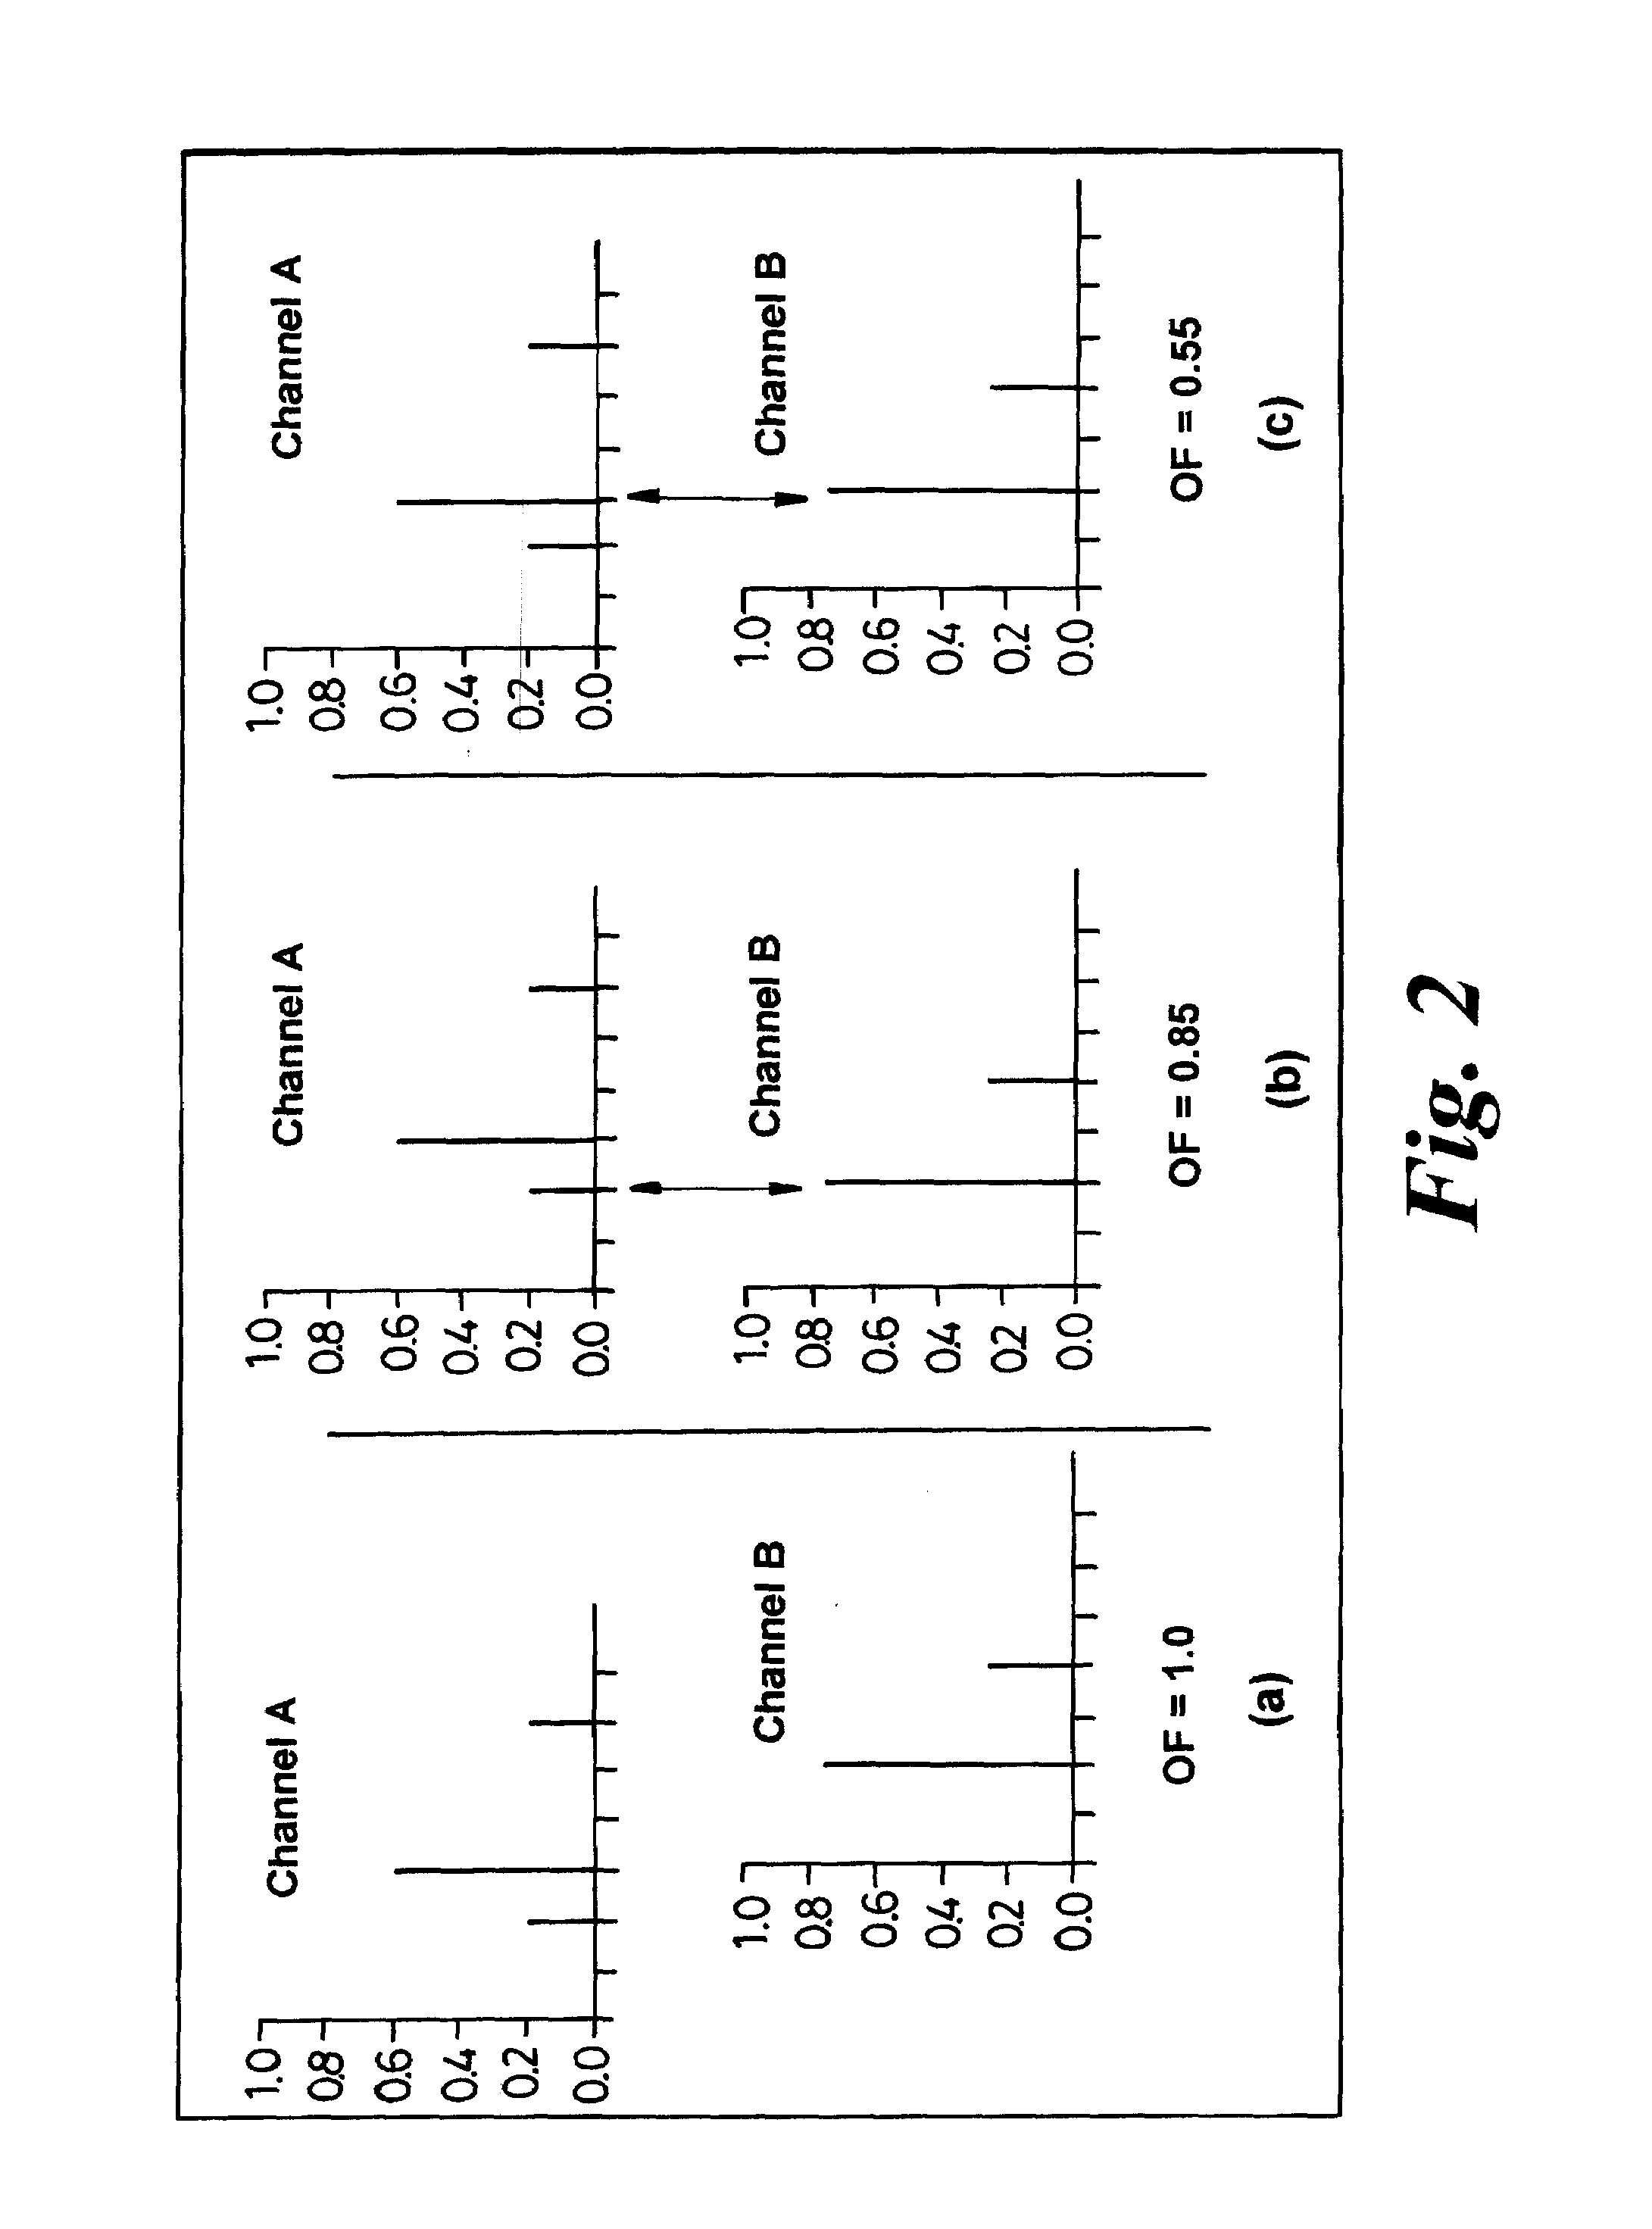 Method and apparatus for using synchronous CDMA in a mobile environment